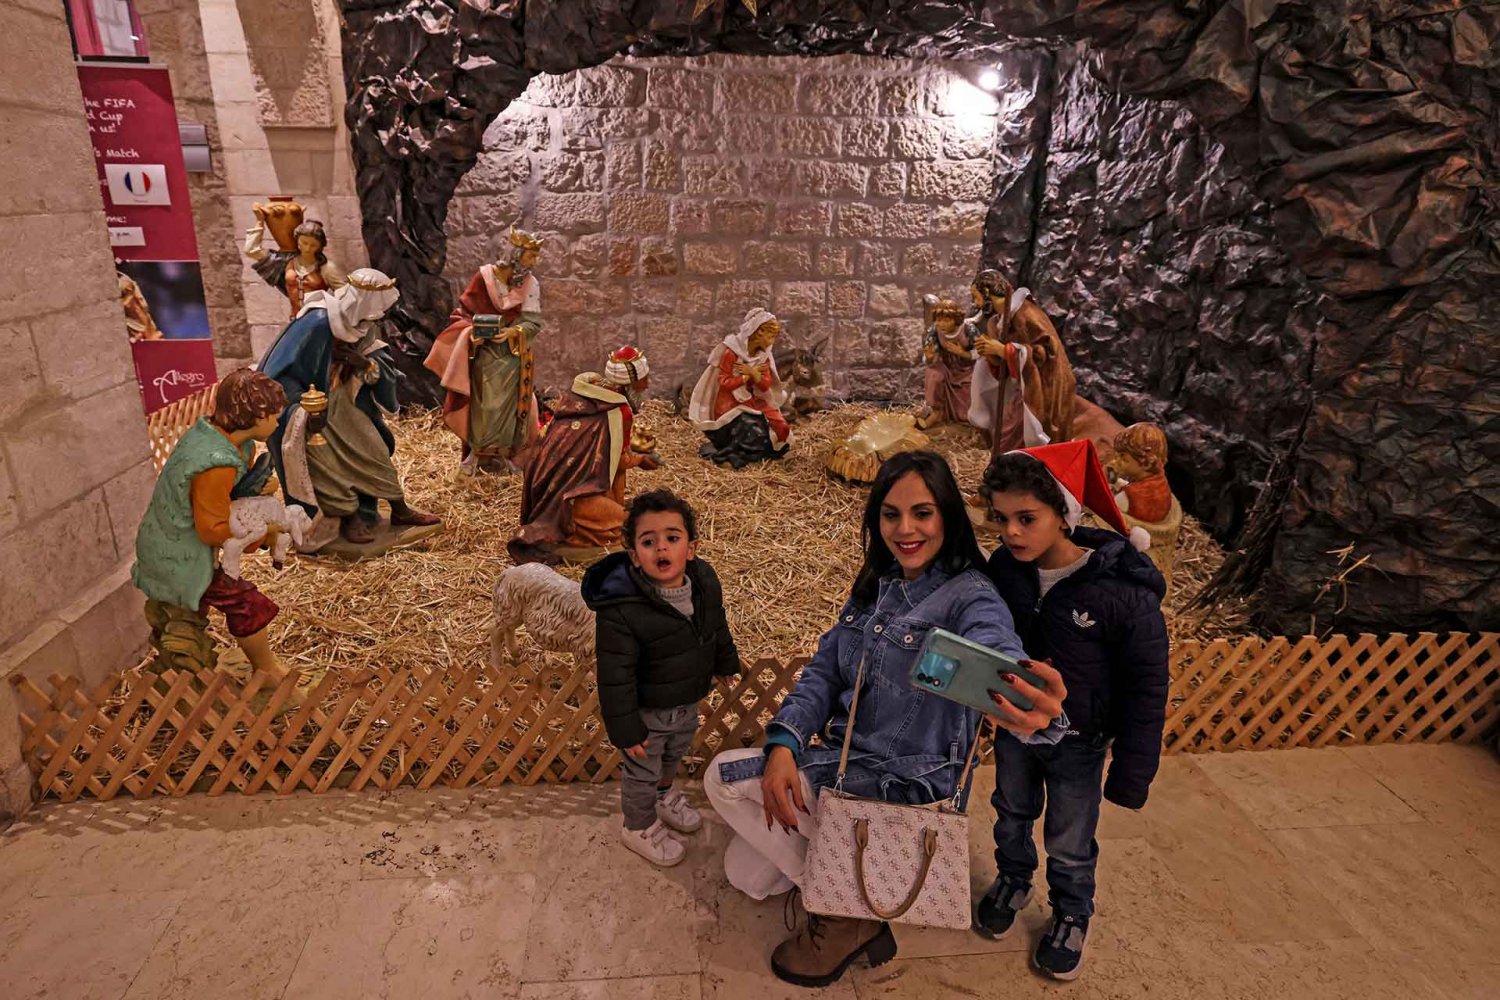 A woman and children pose for a photo before a manger scene in the Old City of Jerusalem